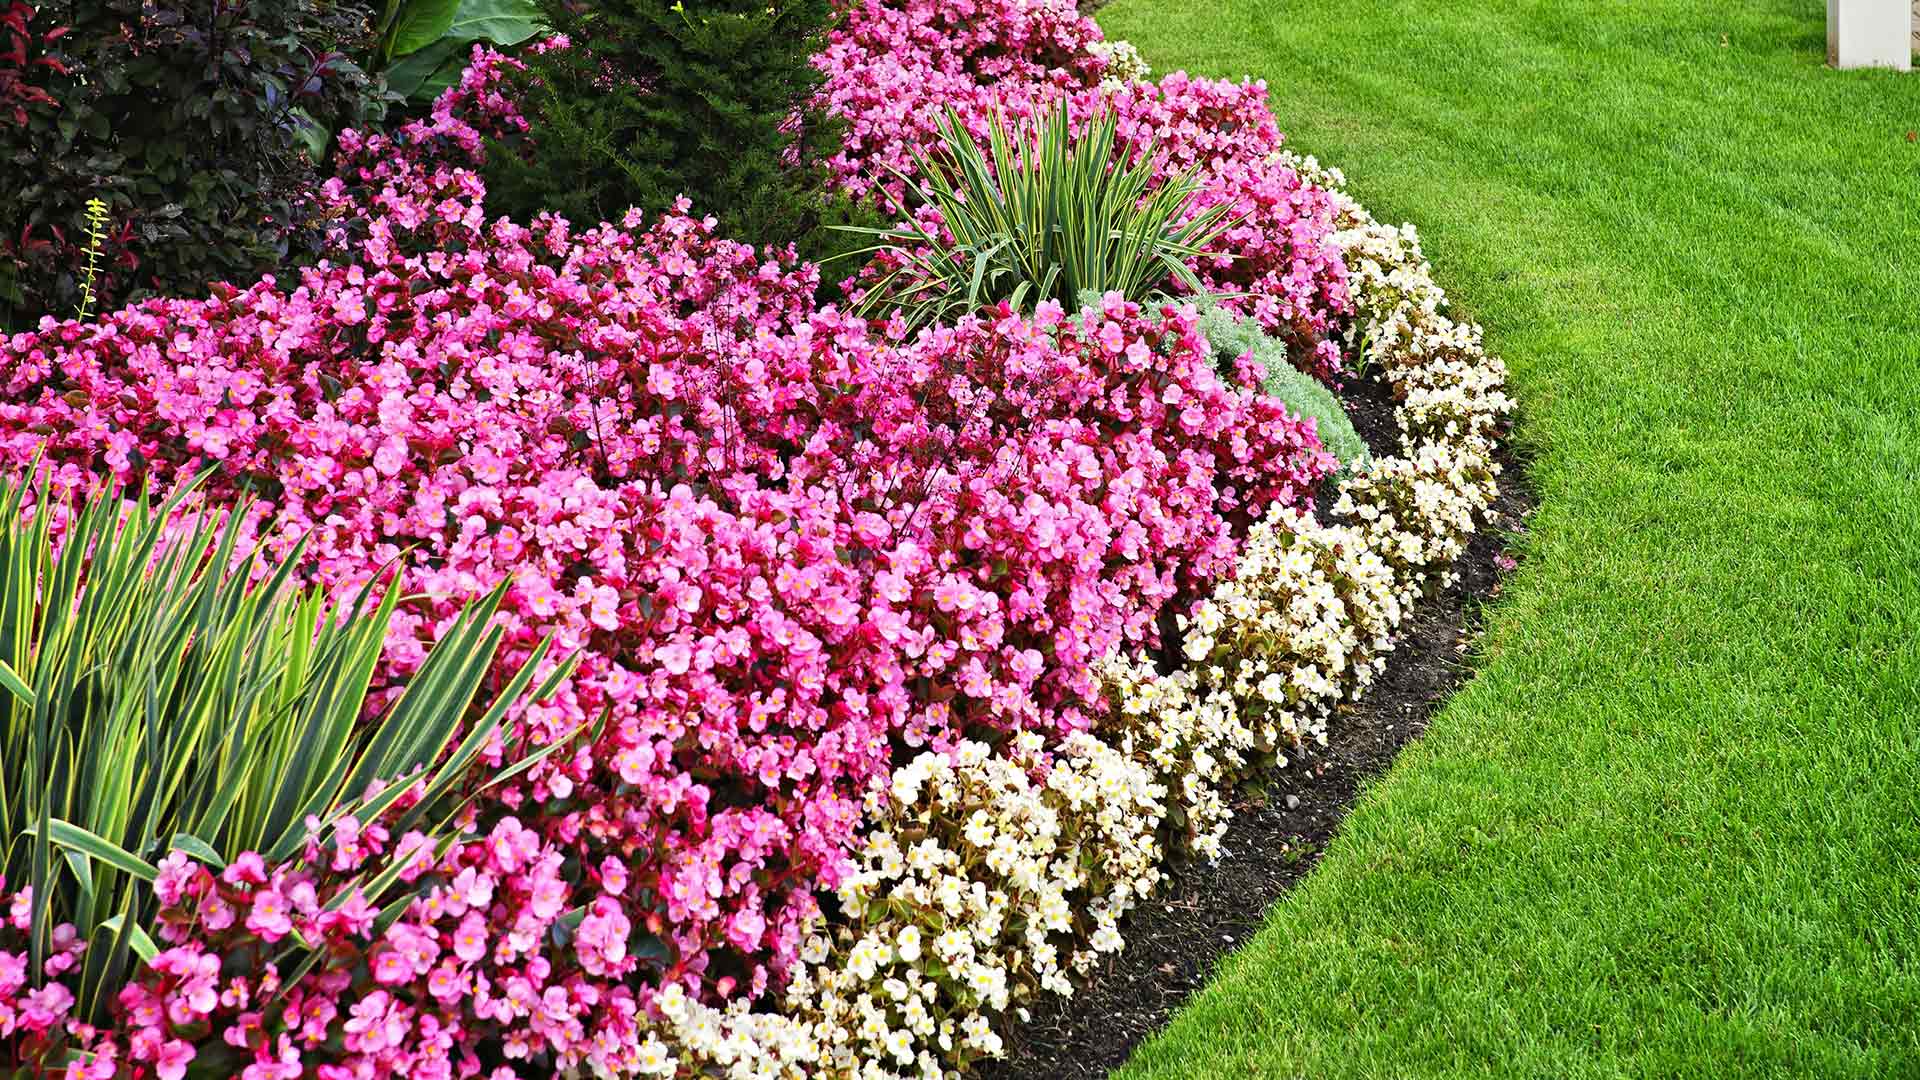 Tips on How to Design a Beautiful, Low-Maintenance Landscape